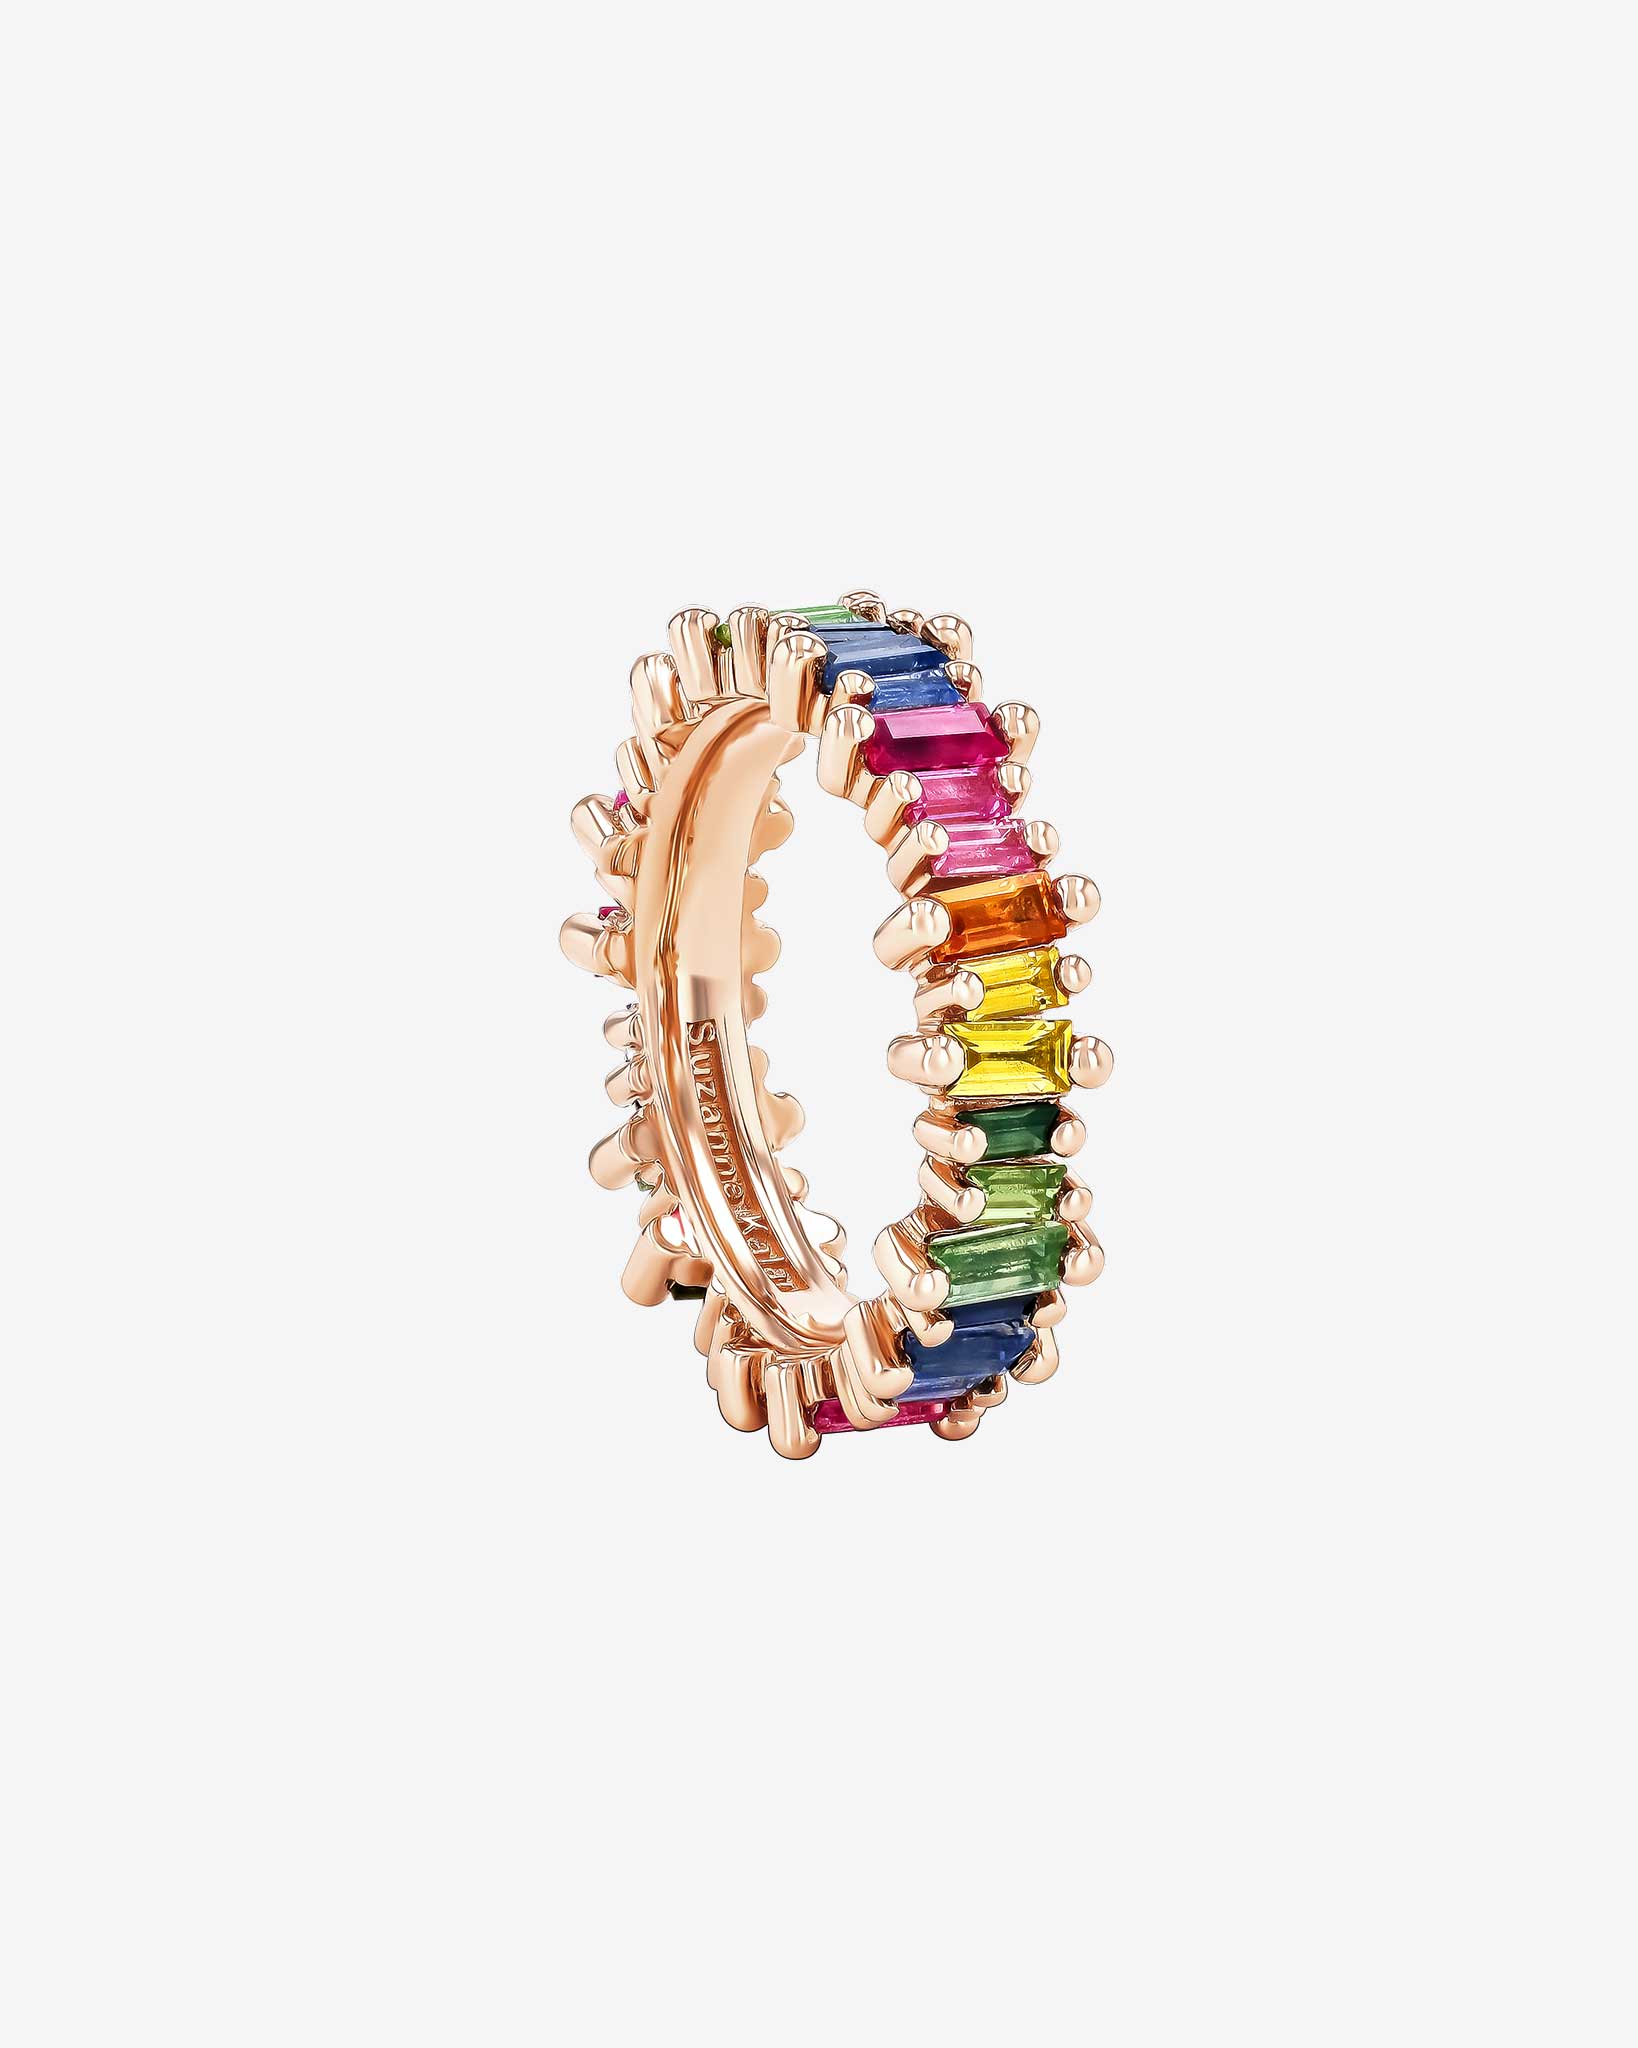 Suzanne Kalan Bold Rainbow Sapphire Eternity Band in 18k rose gold